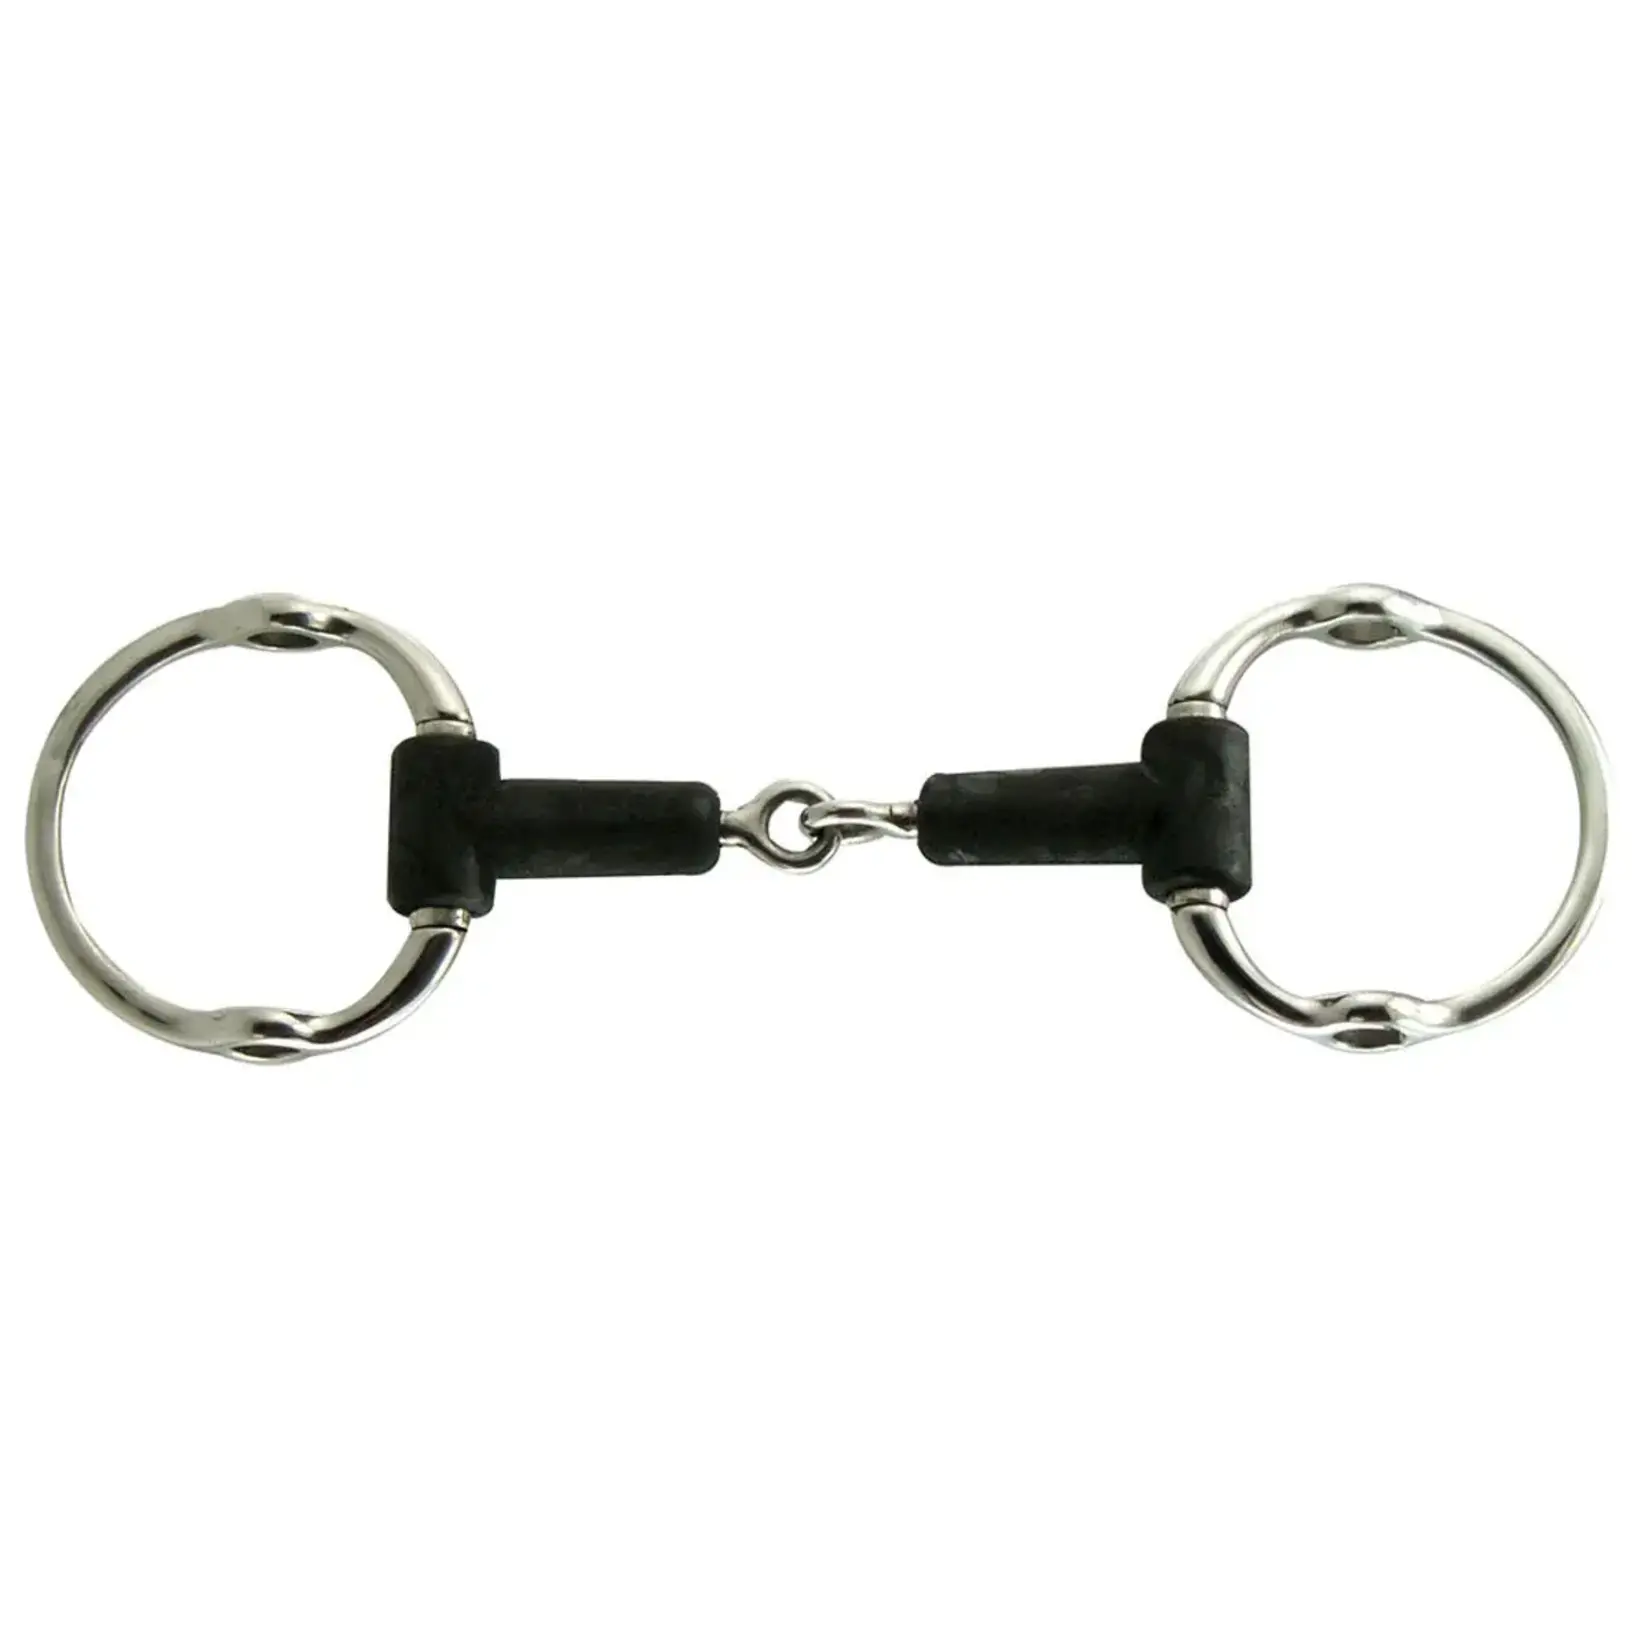 Soft Rubber Mouth Stainless Steel Snaffle Gag Bit